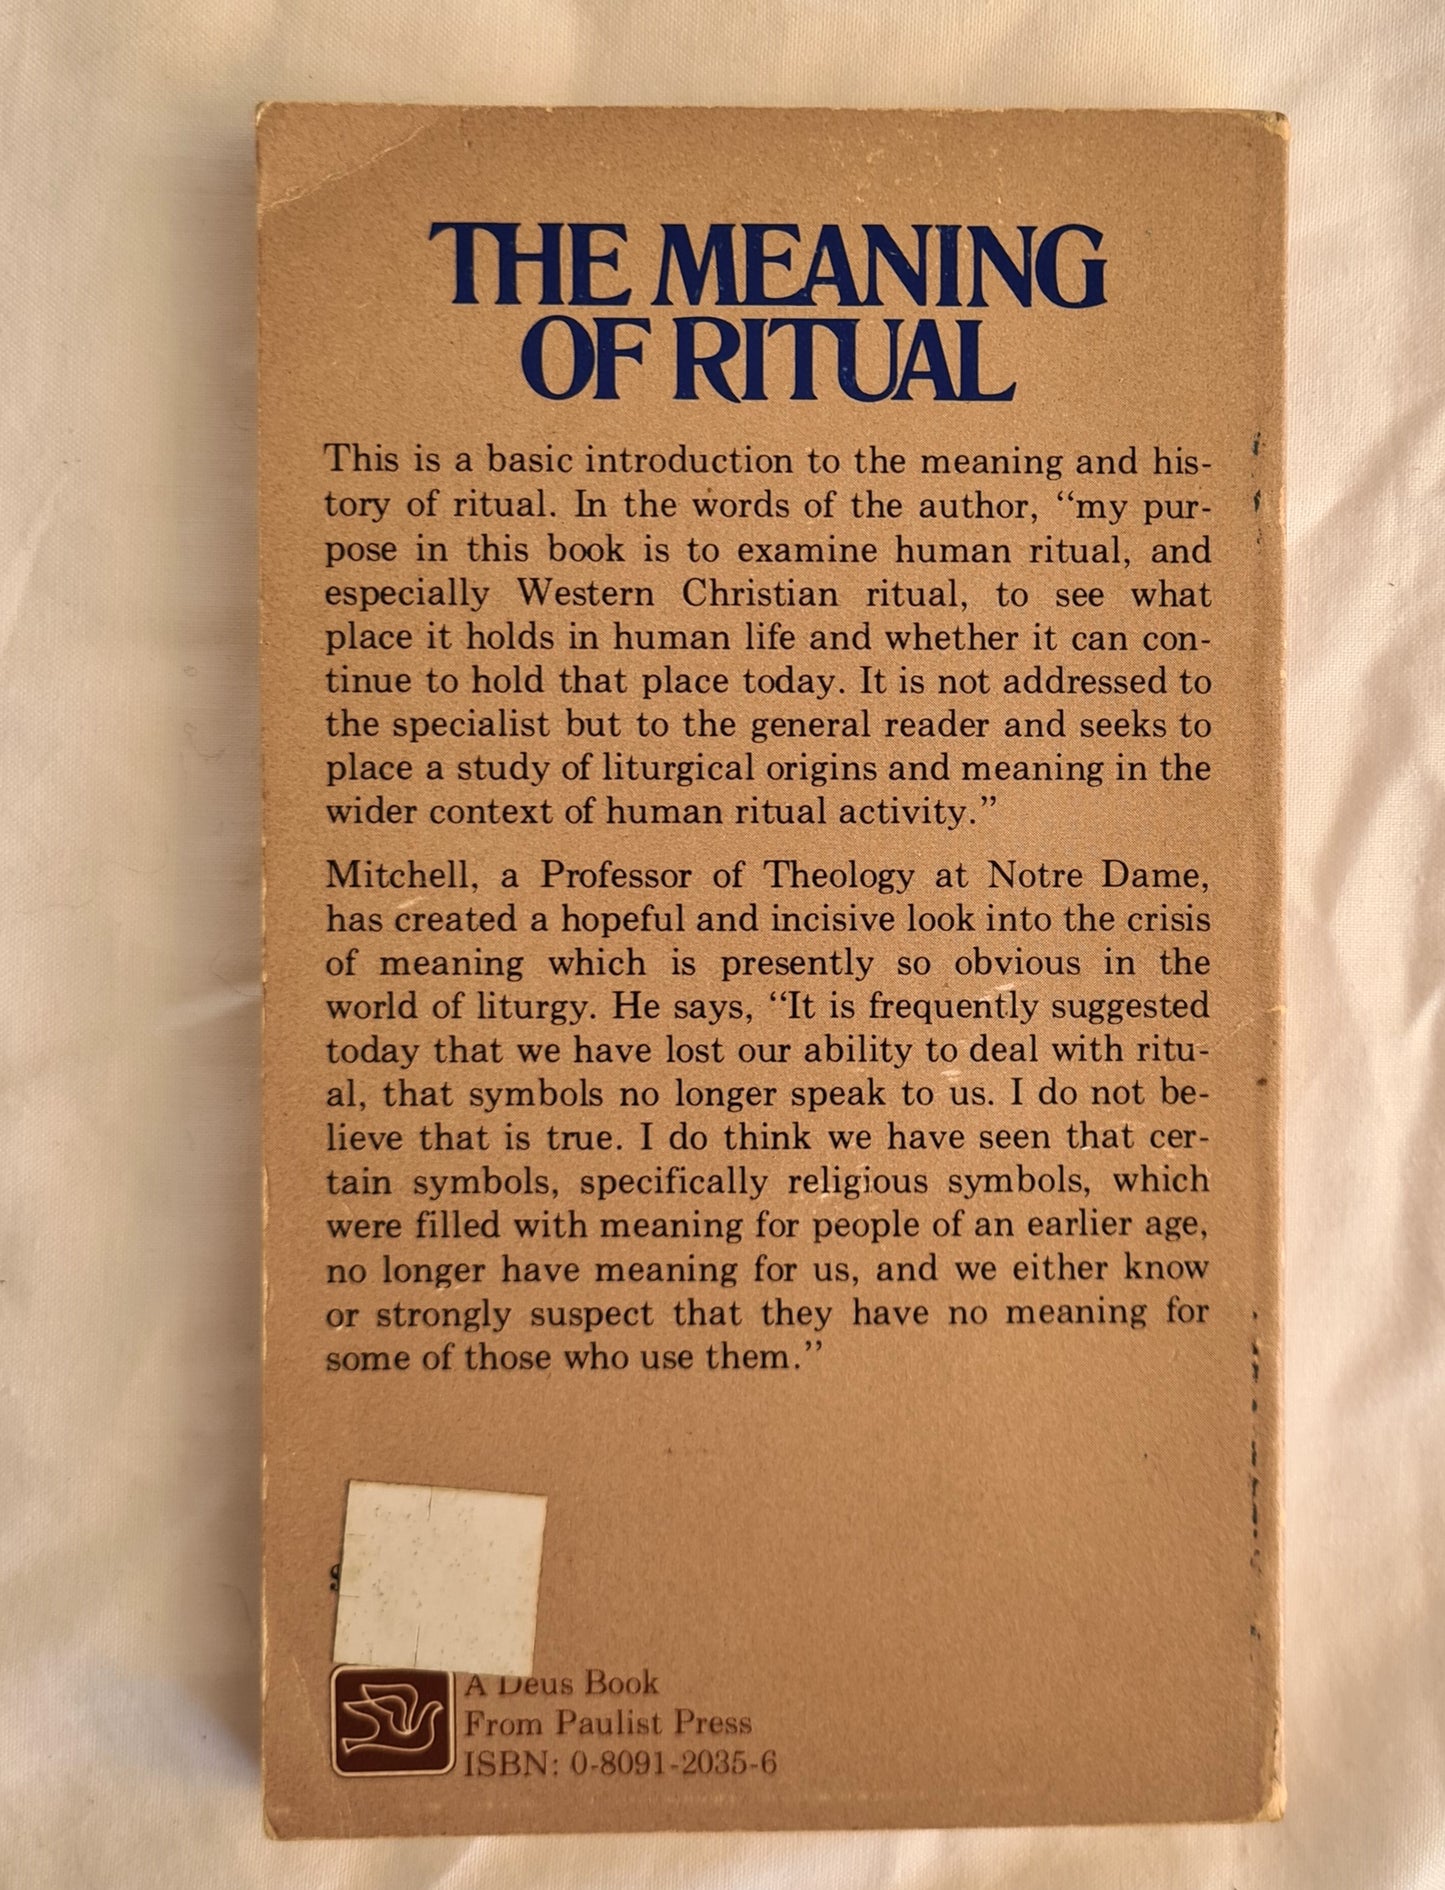 The Meaning of Ritual by Leonel L. Mitchell